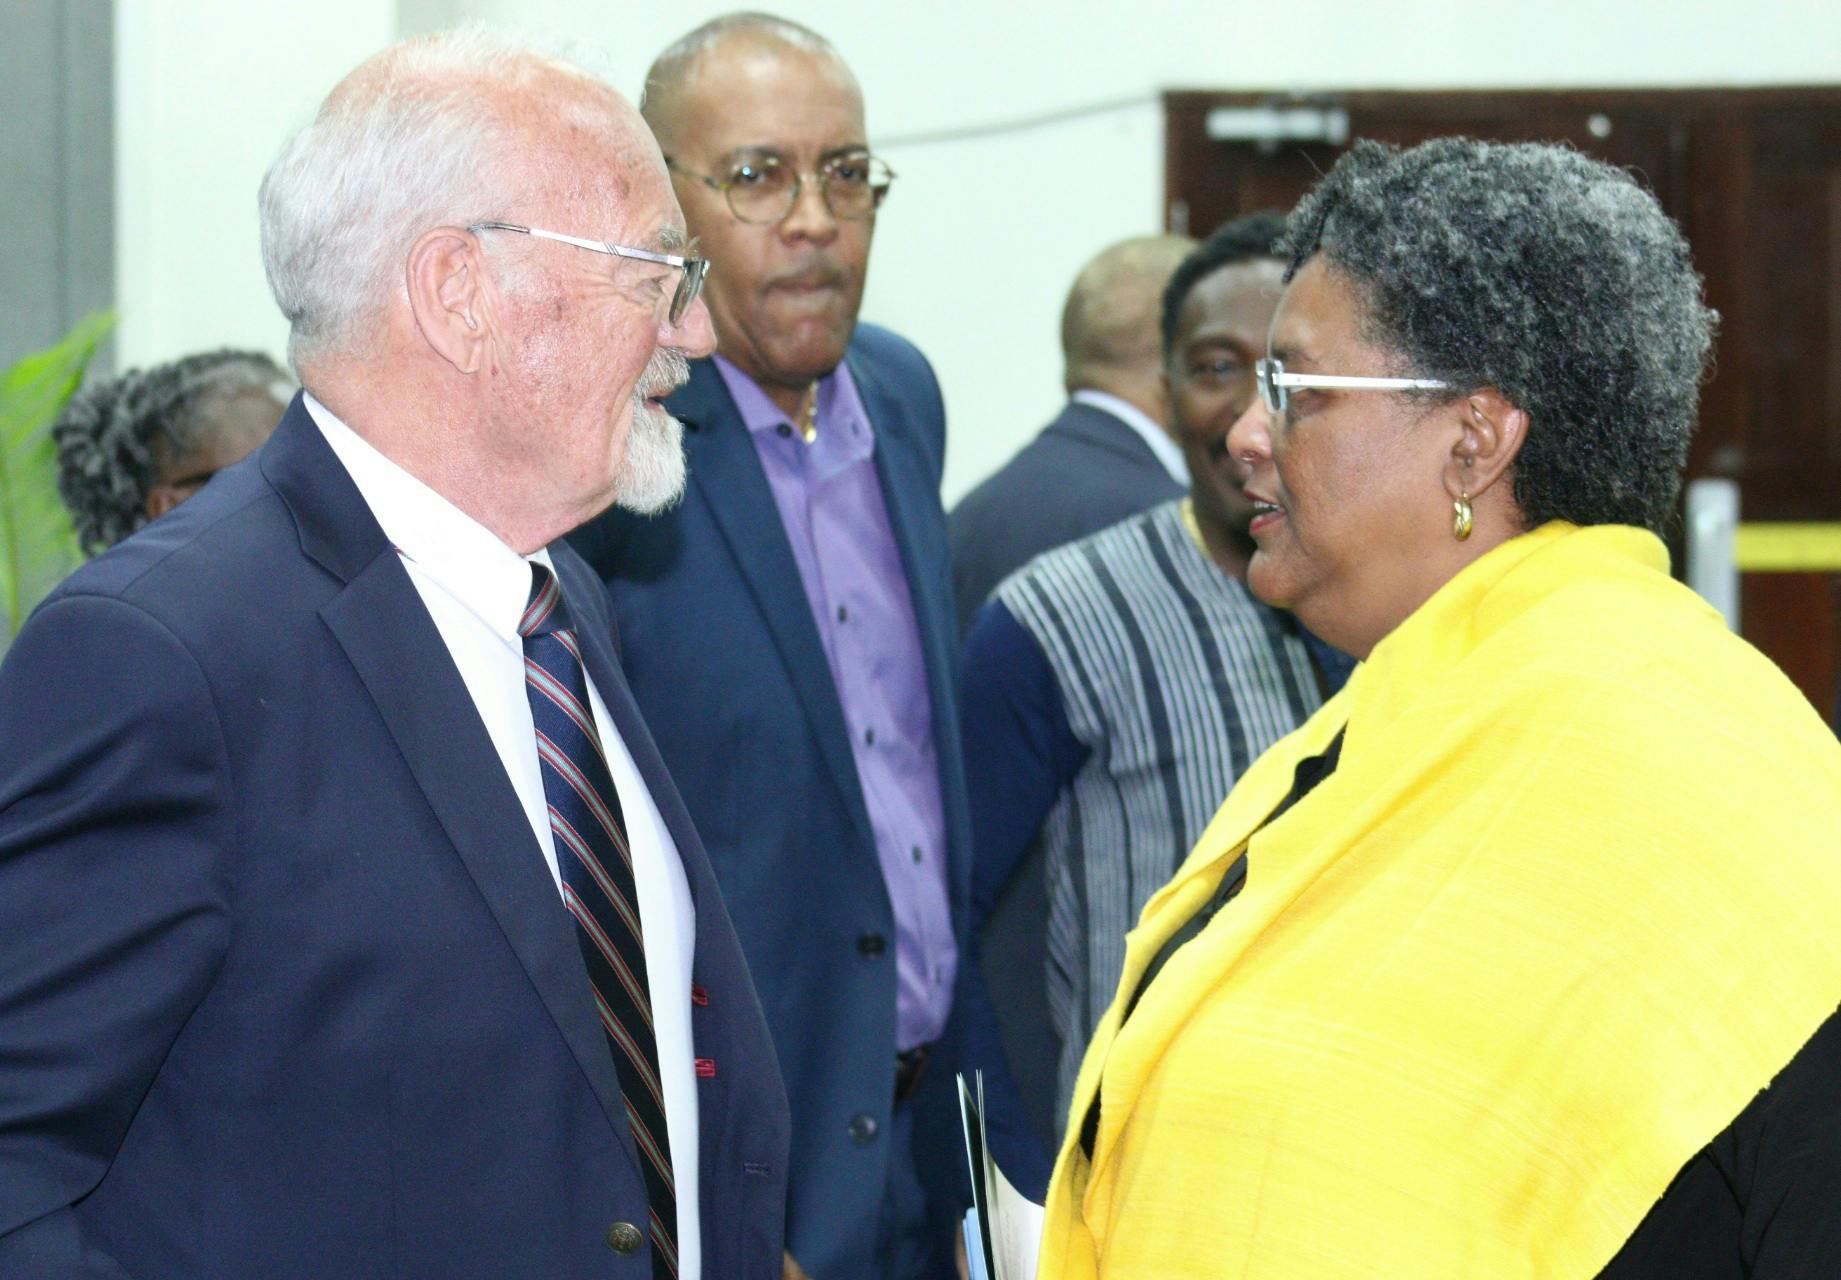 Prime Minister Mia Mottley Emphasizes Cultural Shift to Address Climate Change Challenges